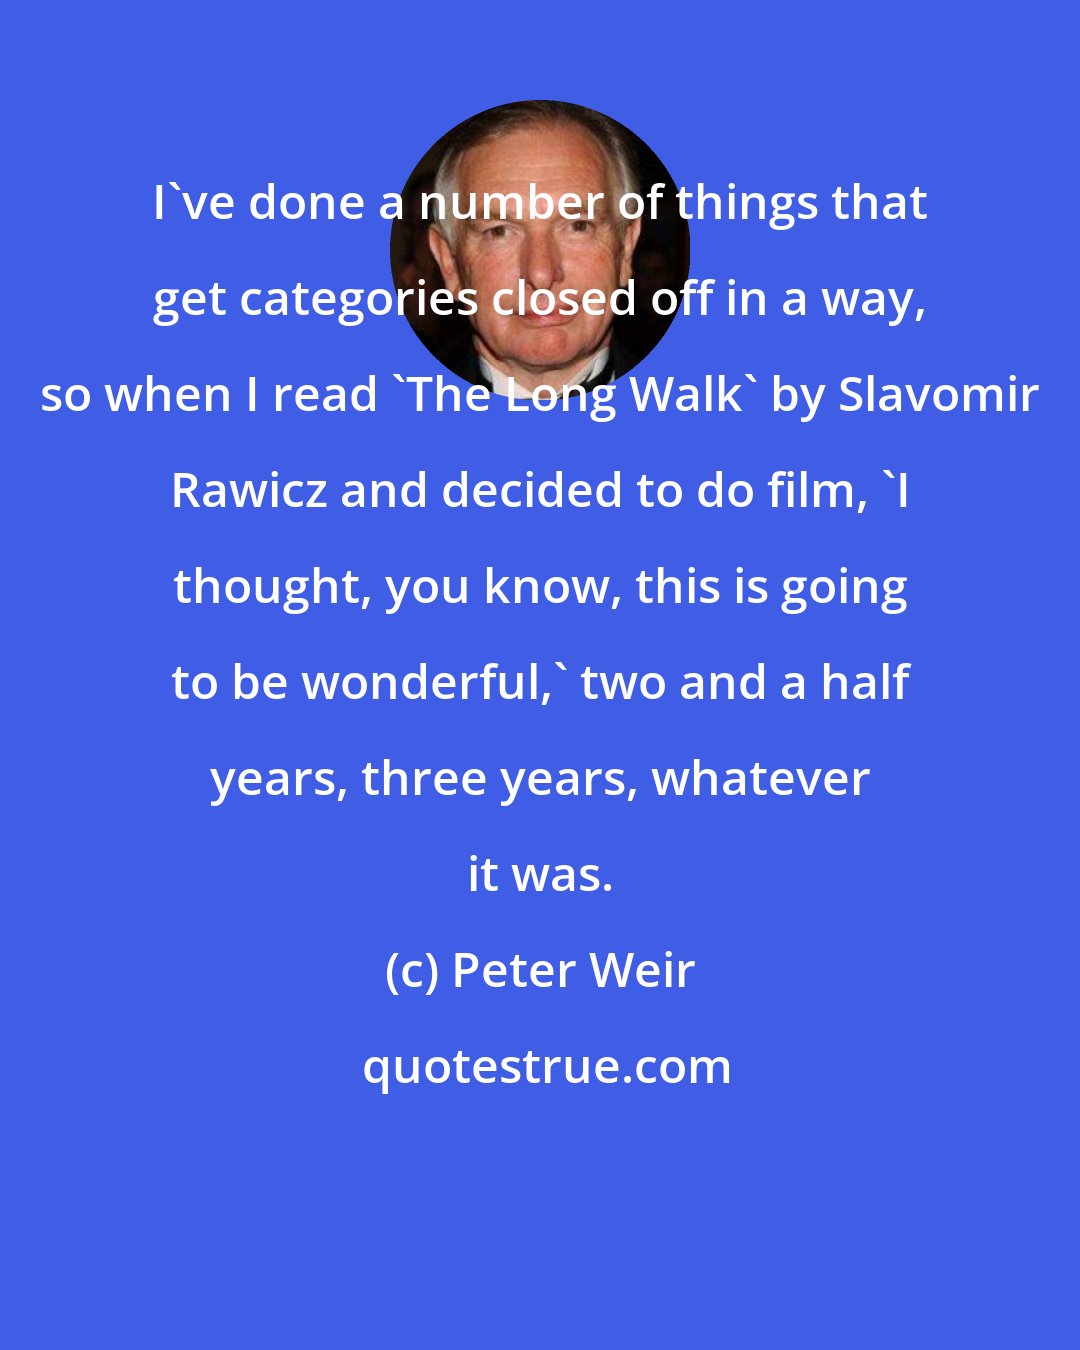 Peter Weir: I've done a number of things that get categories closed off in a way, so when I read 'The Long Walk' by Slavomir Rawicz and decided to do film, 'I thought, you know, this is going to be wonderful,' two and a half years, three years, whatever it was.